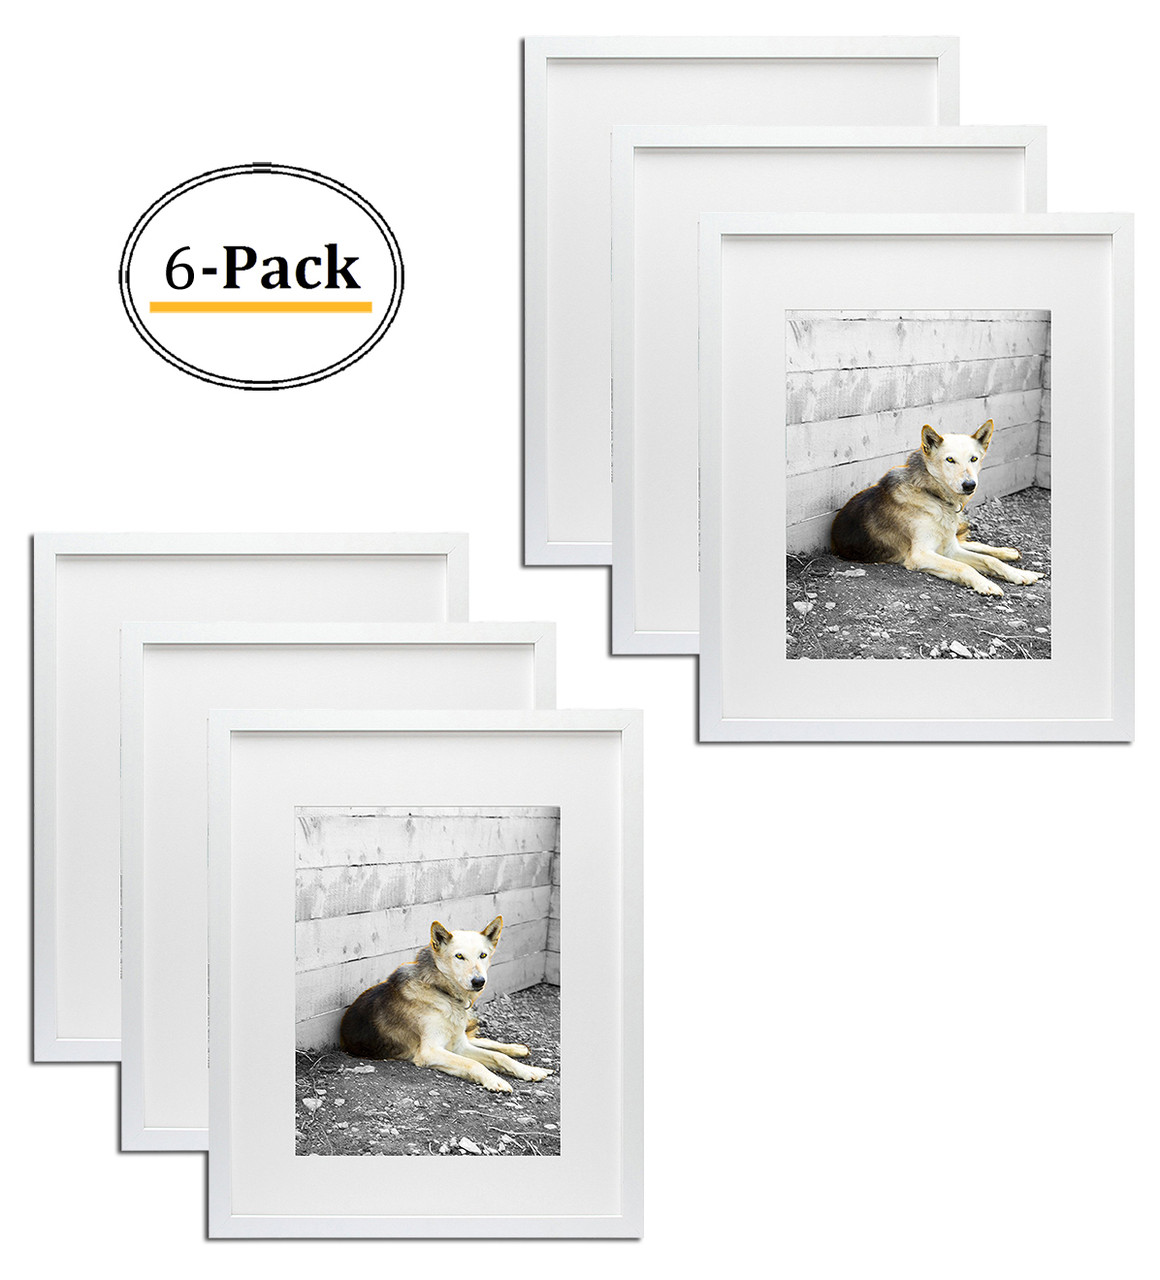 16x20 Frame for 11x14 Picture White Wood (6 Pcs per Box)